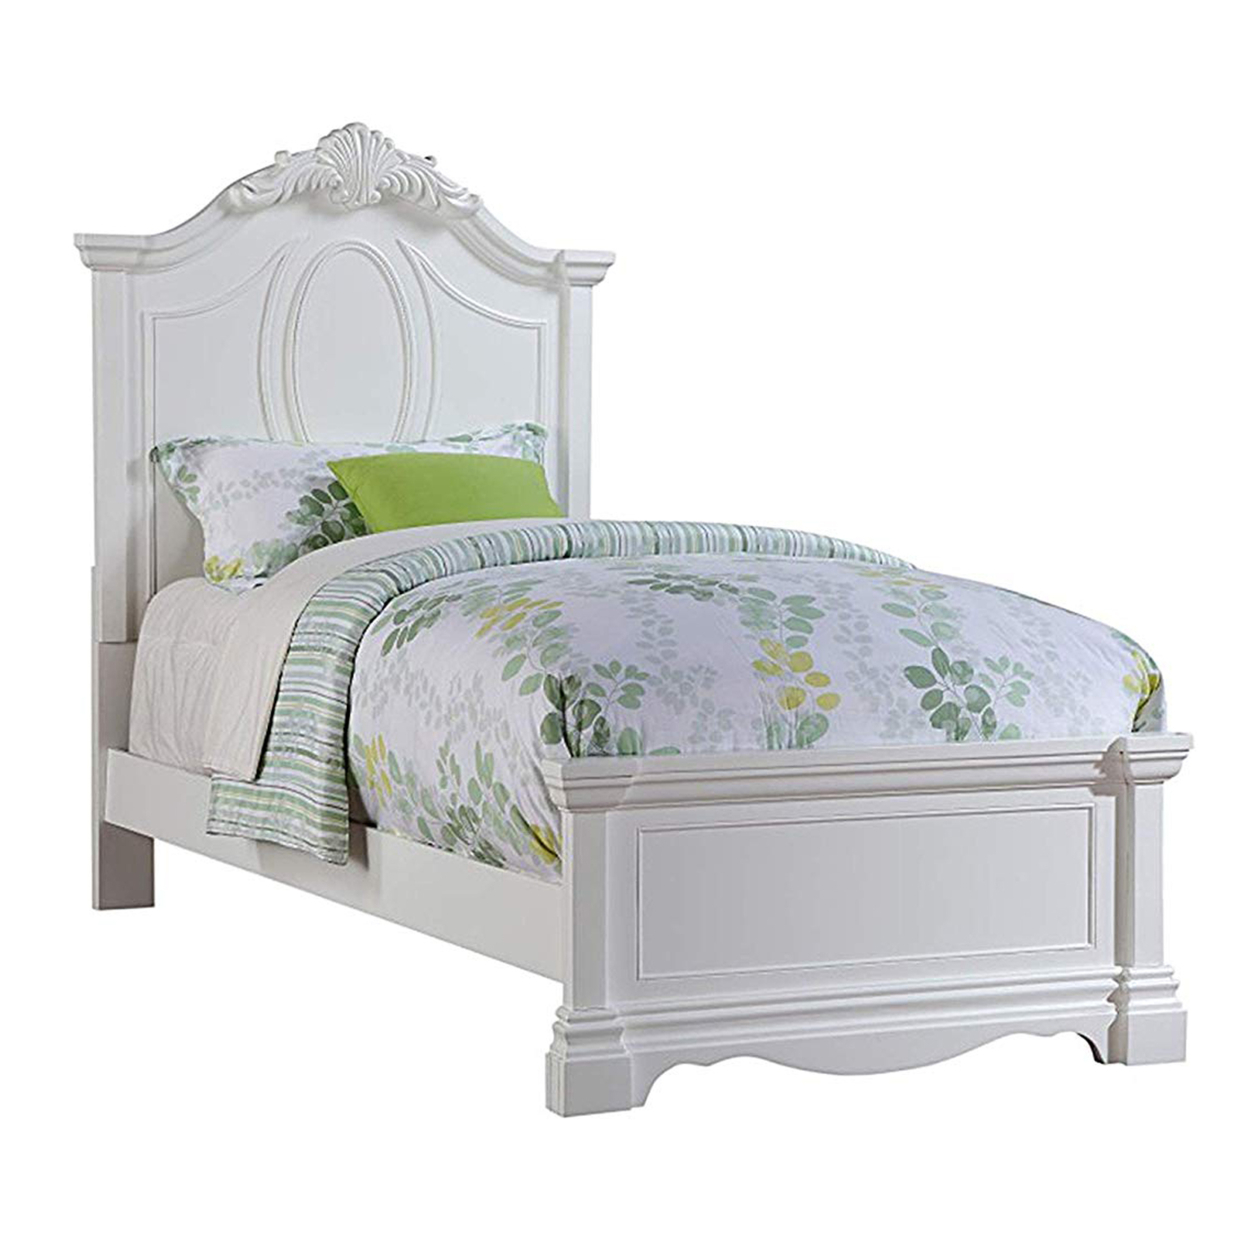 Traditional Style Wooden Full Size Bed With Crown Carved Headboard, White- ACME